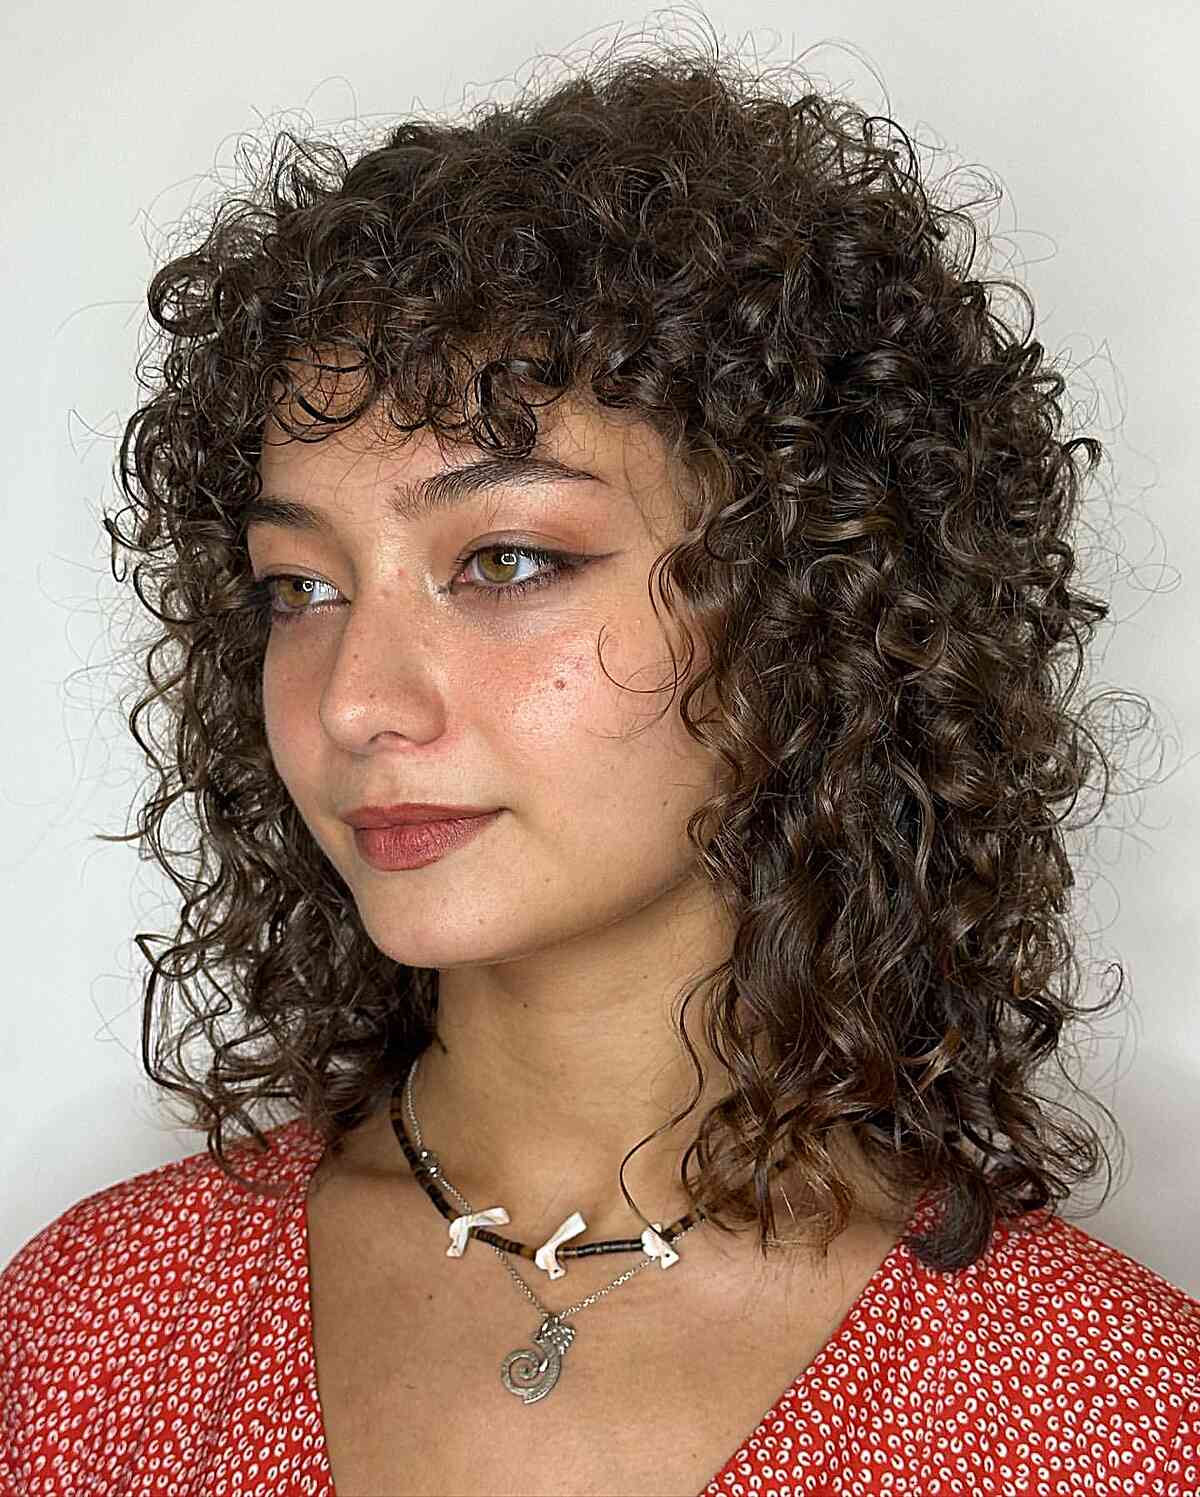 Shaggy Curly Lob with Bangs for women with shoulder-length hair